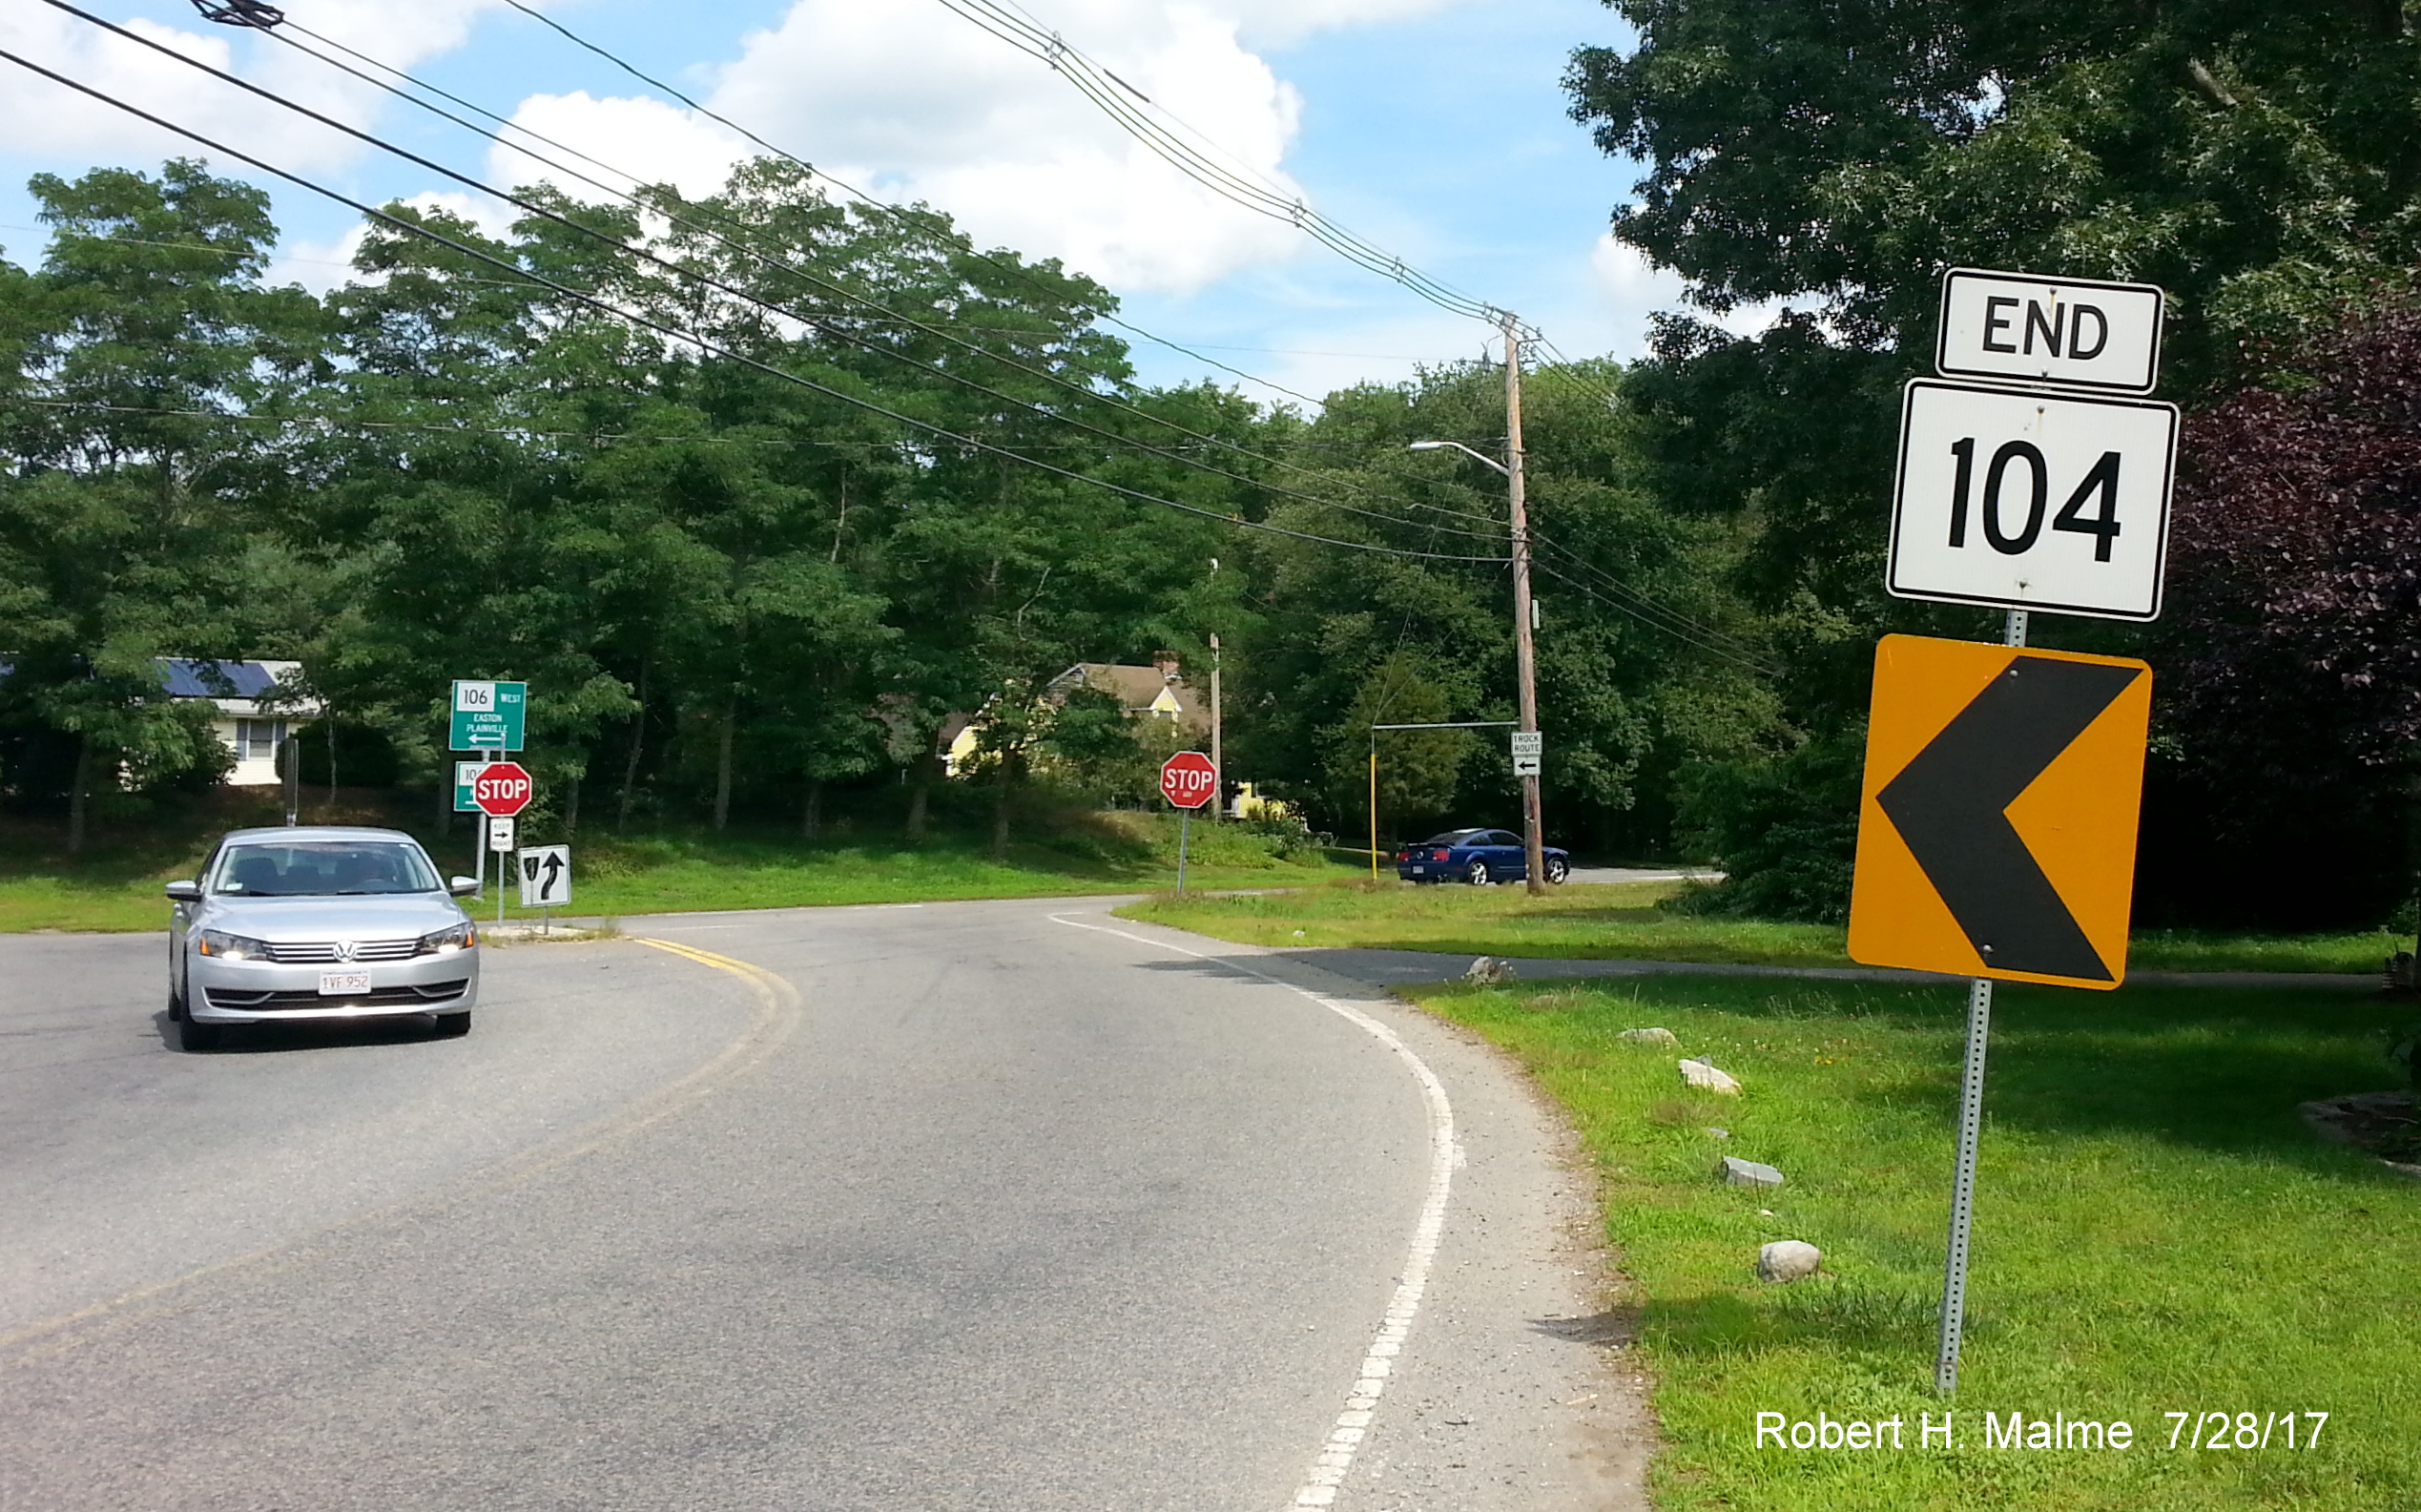 Image of End 104 trailblazer at MA 106 in East Bridgewater